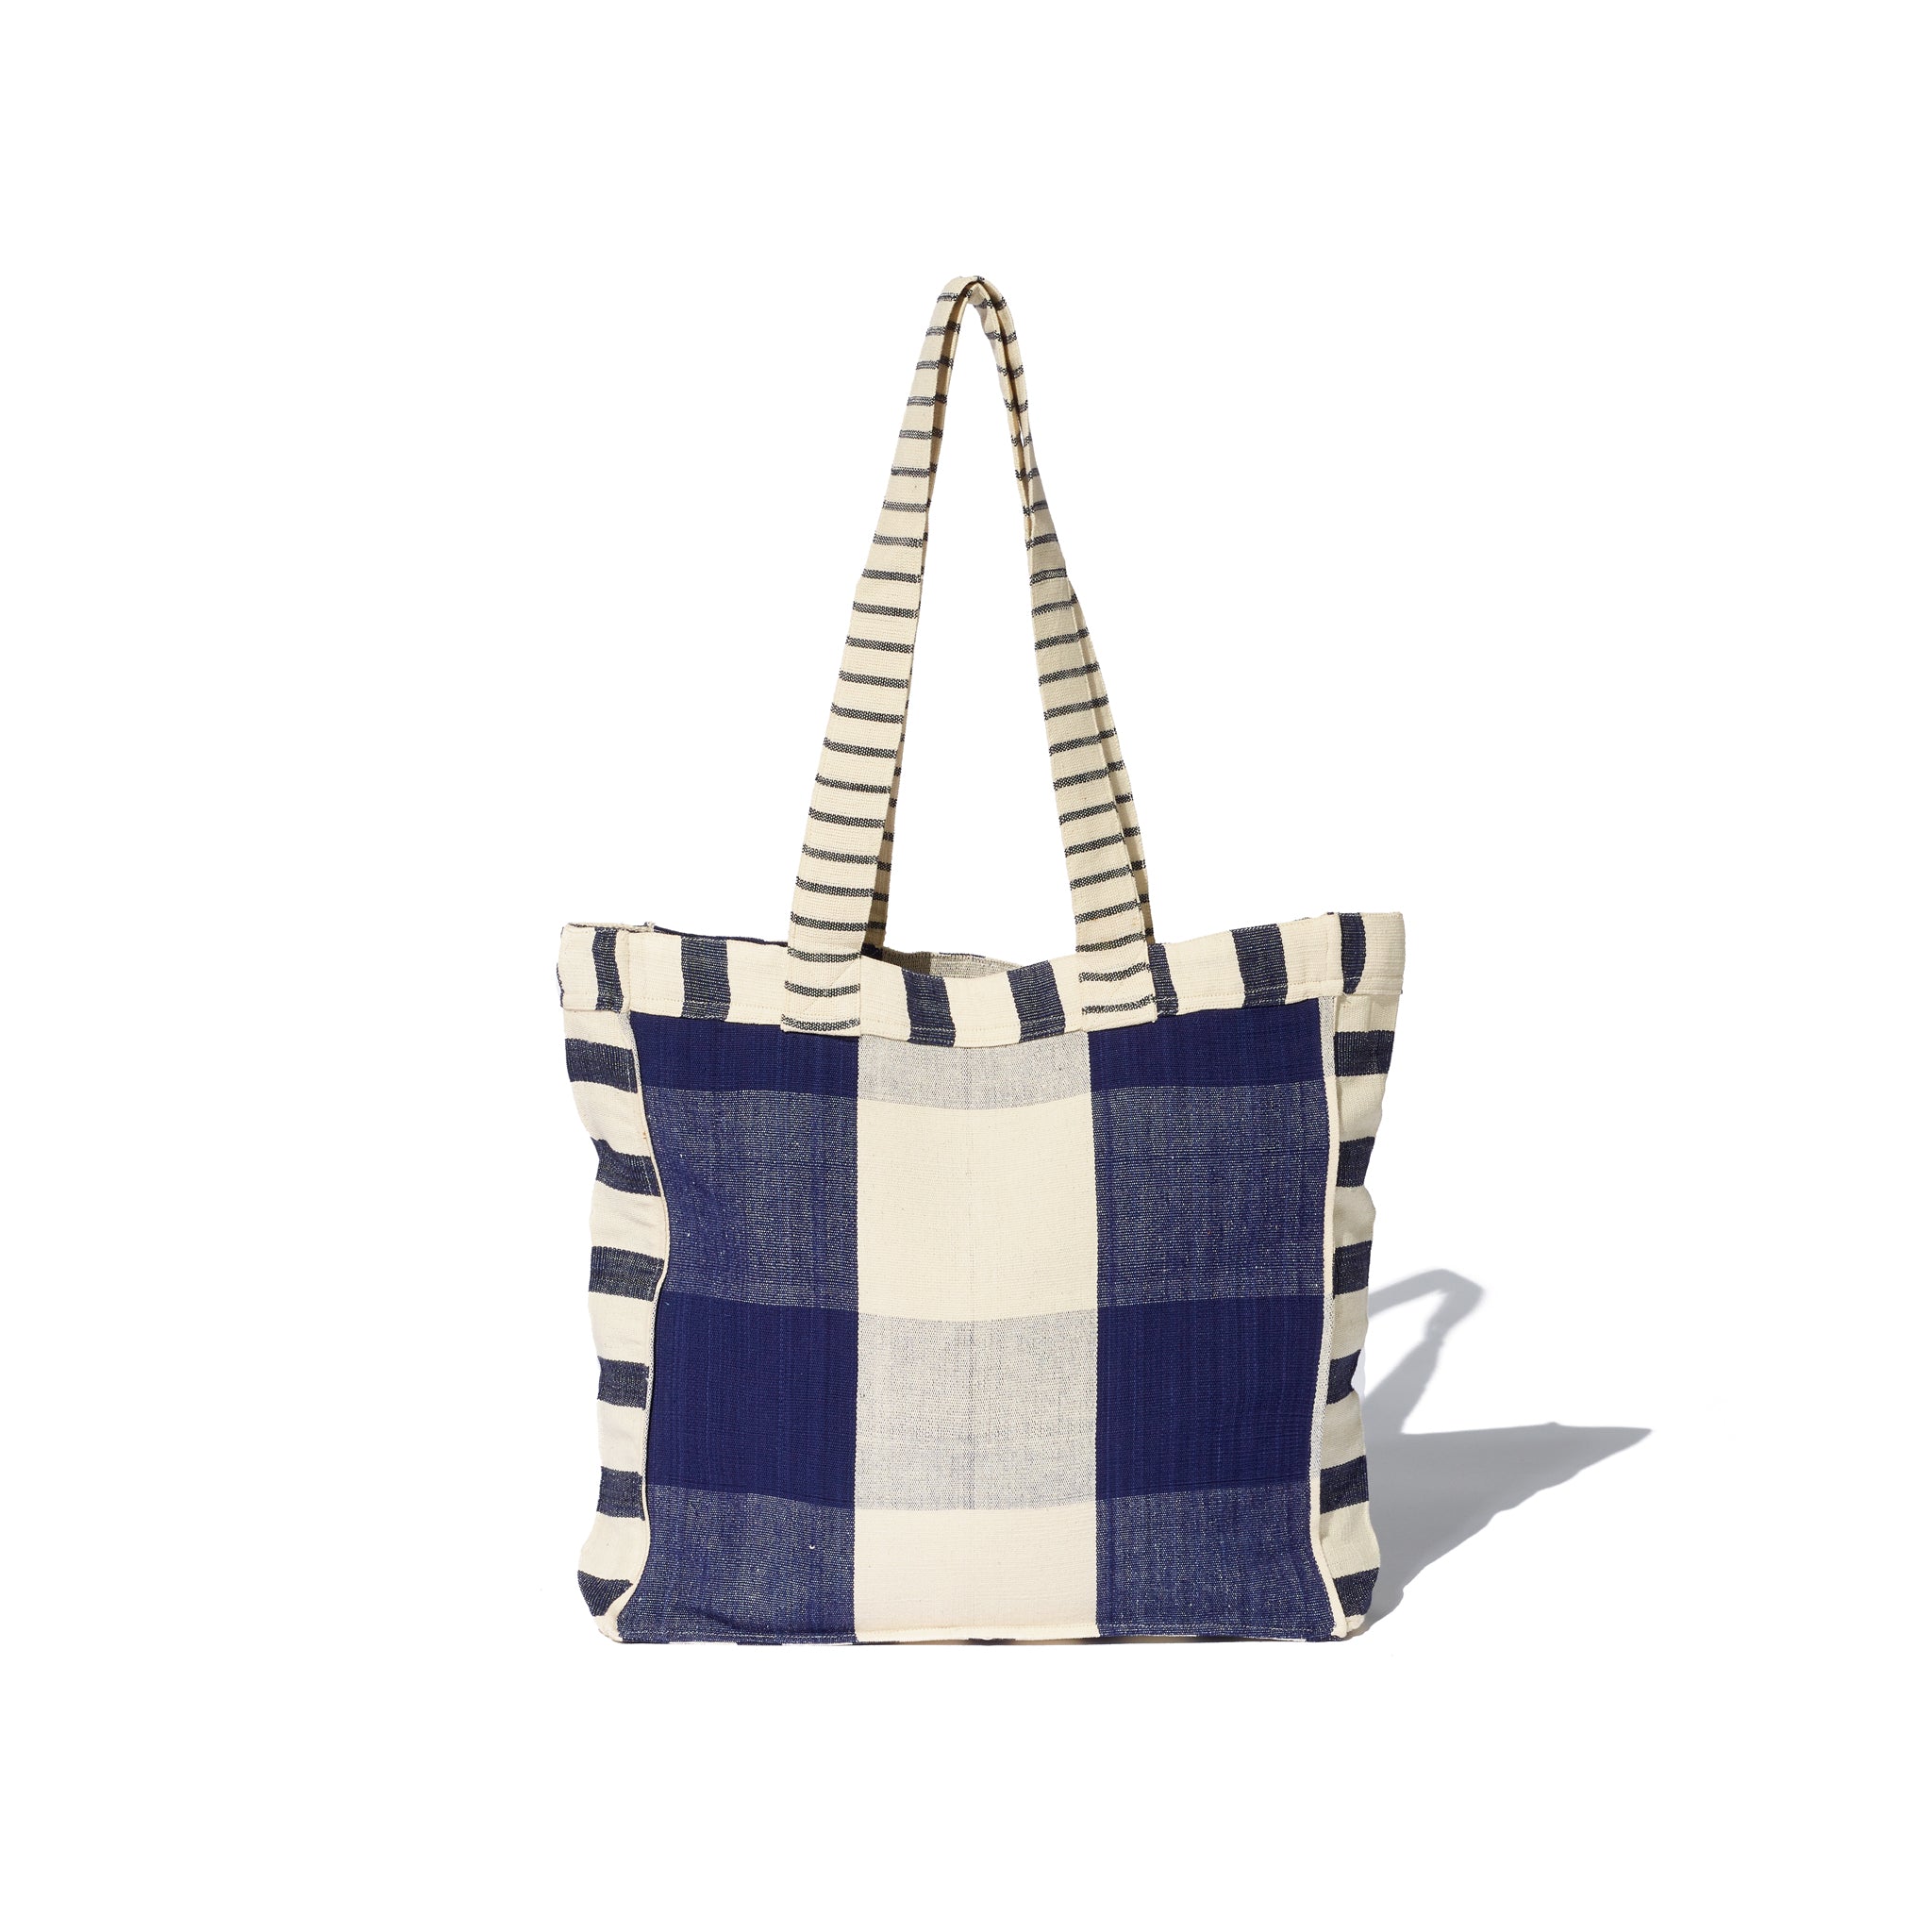 Catch a wave with our surfing-inspired tote bag, made from 100% cotton, woven on a traditional loom.